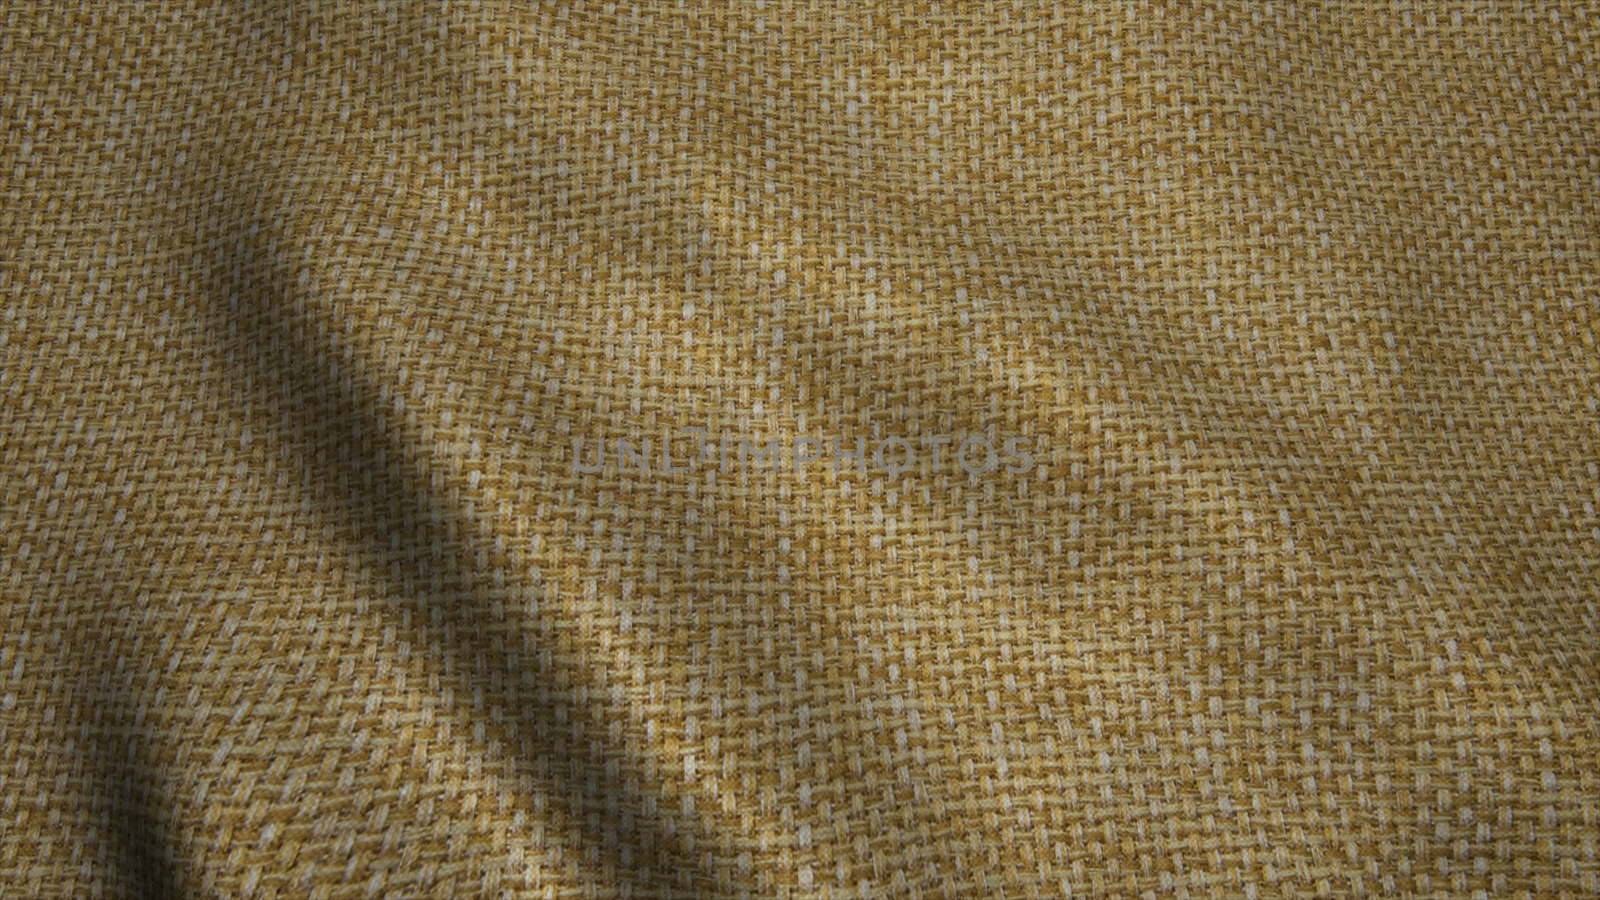 Highly detailed texture of burlap. Sackcloth by nolimit046